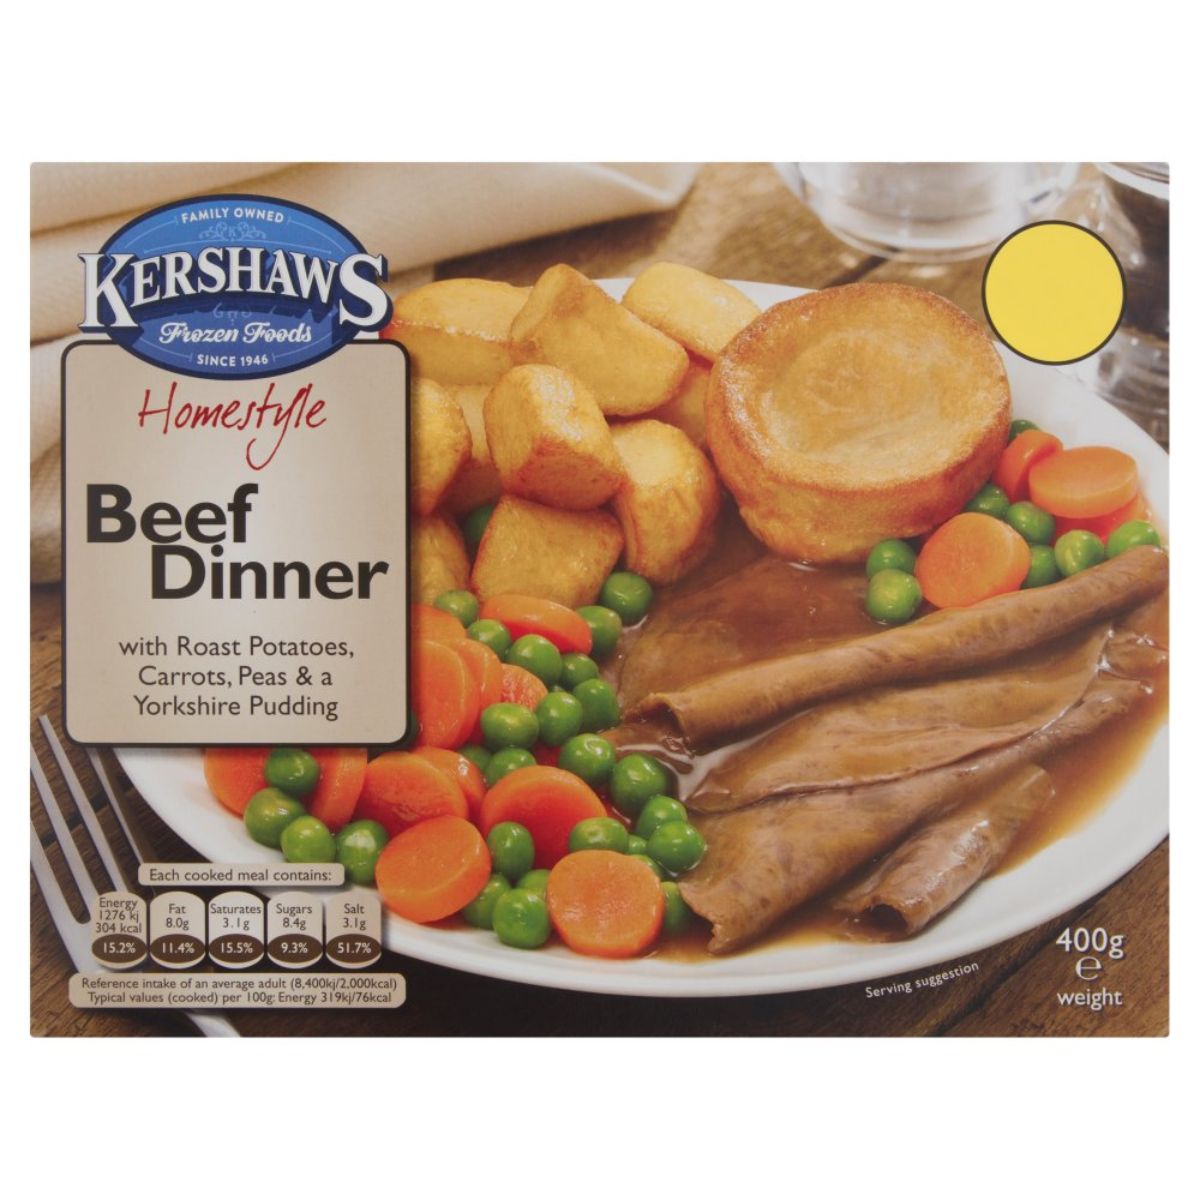 A box of Kershaws - Homestyle Beef Dinner with Roast Potatoes, Carrots, Peas & a Yorkshire Pudding - 400g.